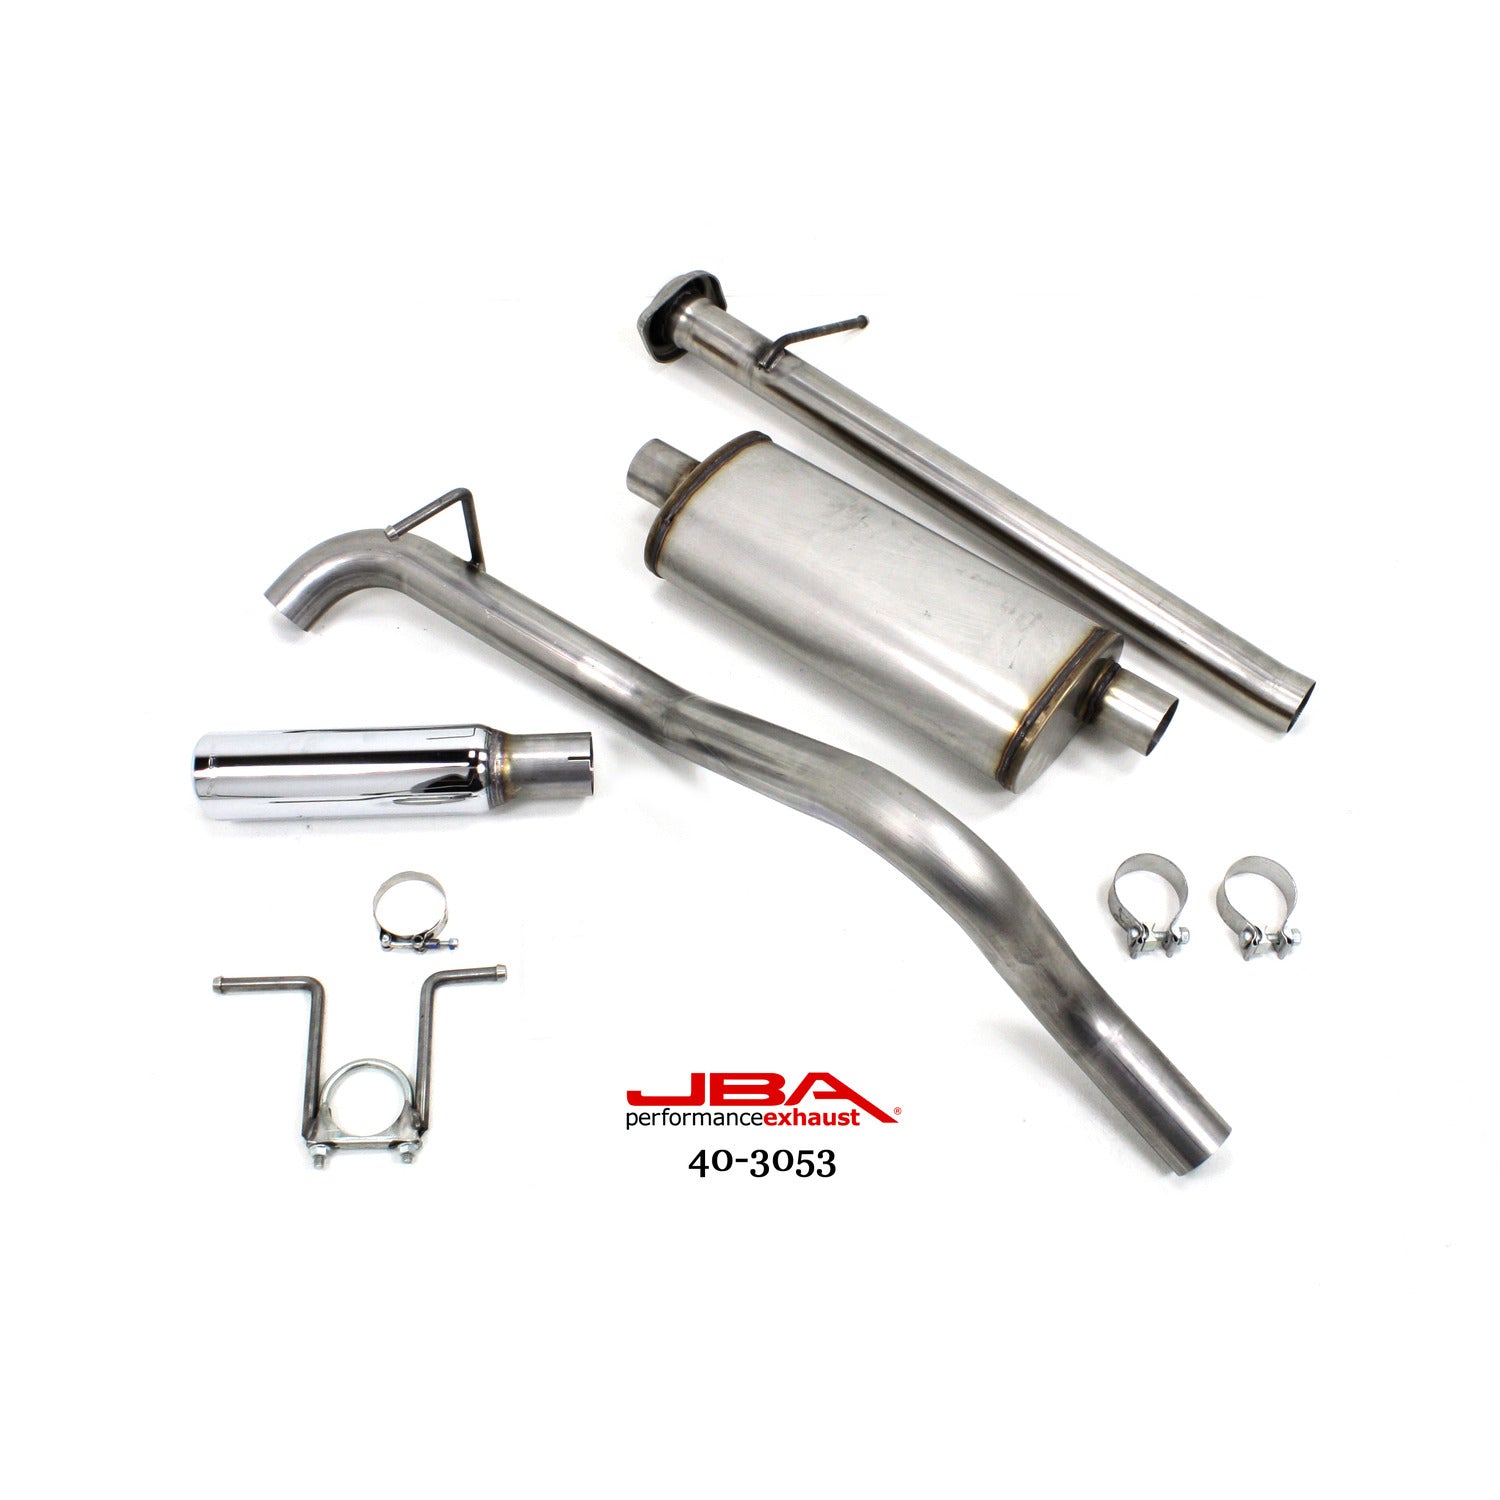 JBA Performance Exhaust 40-3053 2015-17 Chevy Colorado 3.6L V6 2 1/2" Stainless Steel Cat-Back Exhaust System with 3 1/2" Stainless tip single side exit